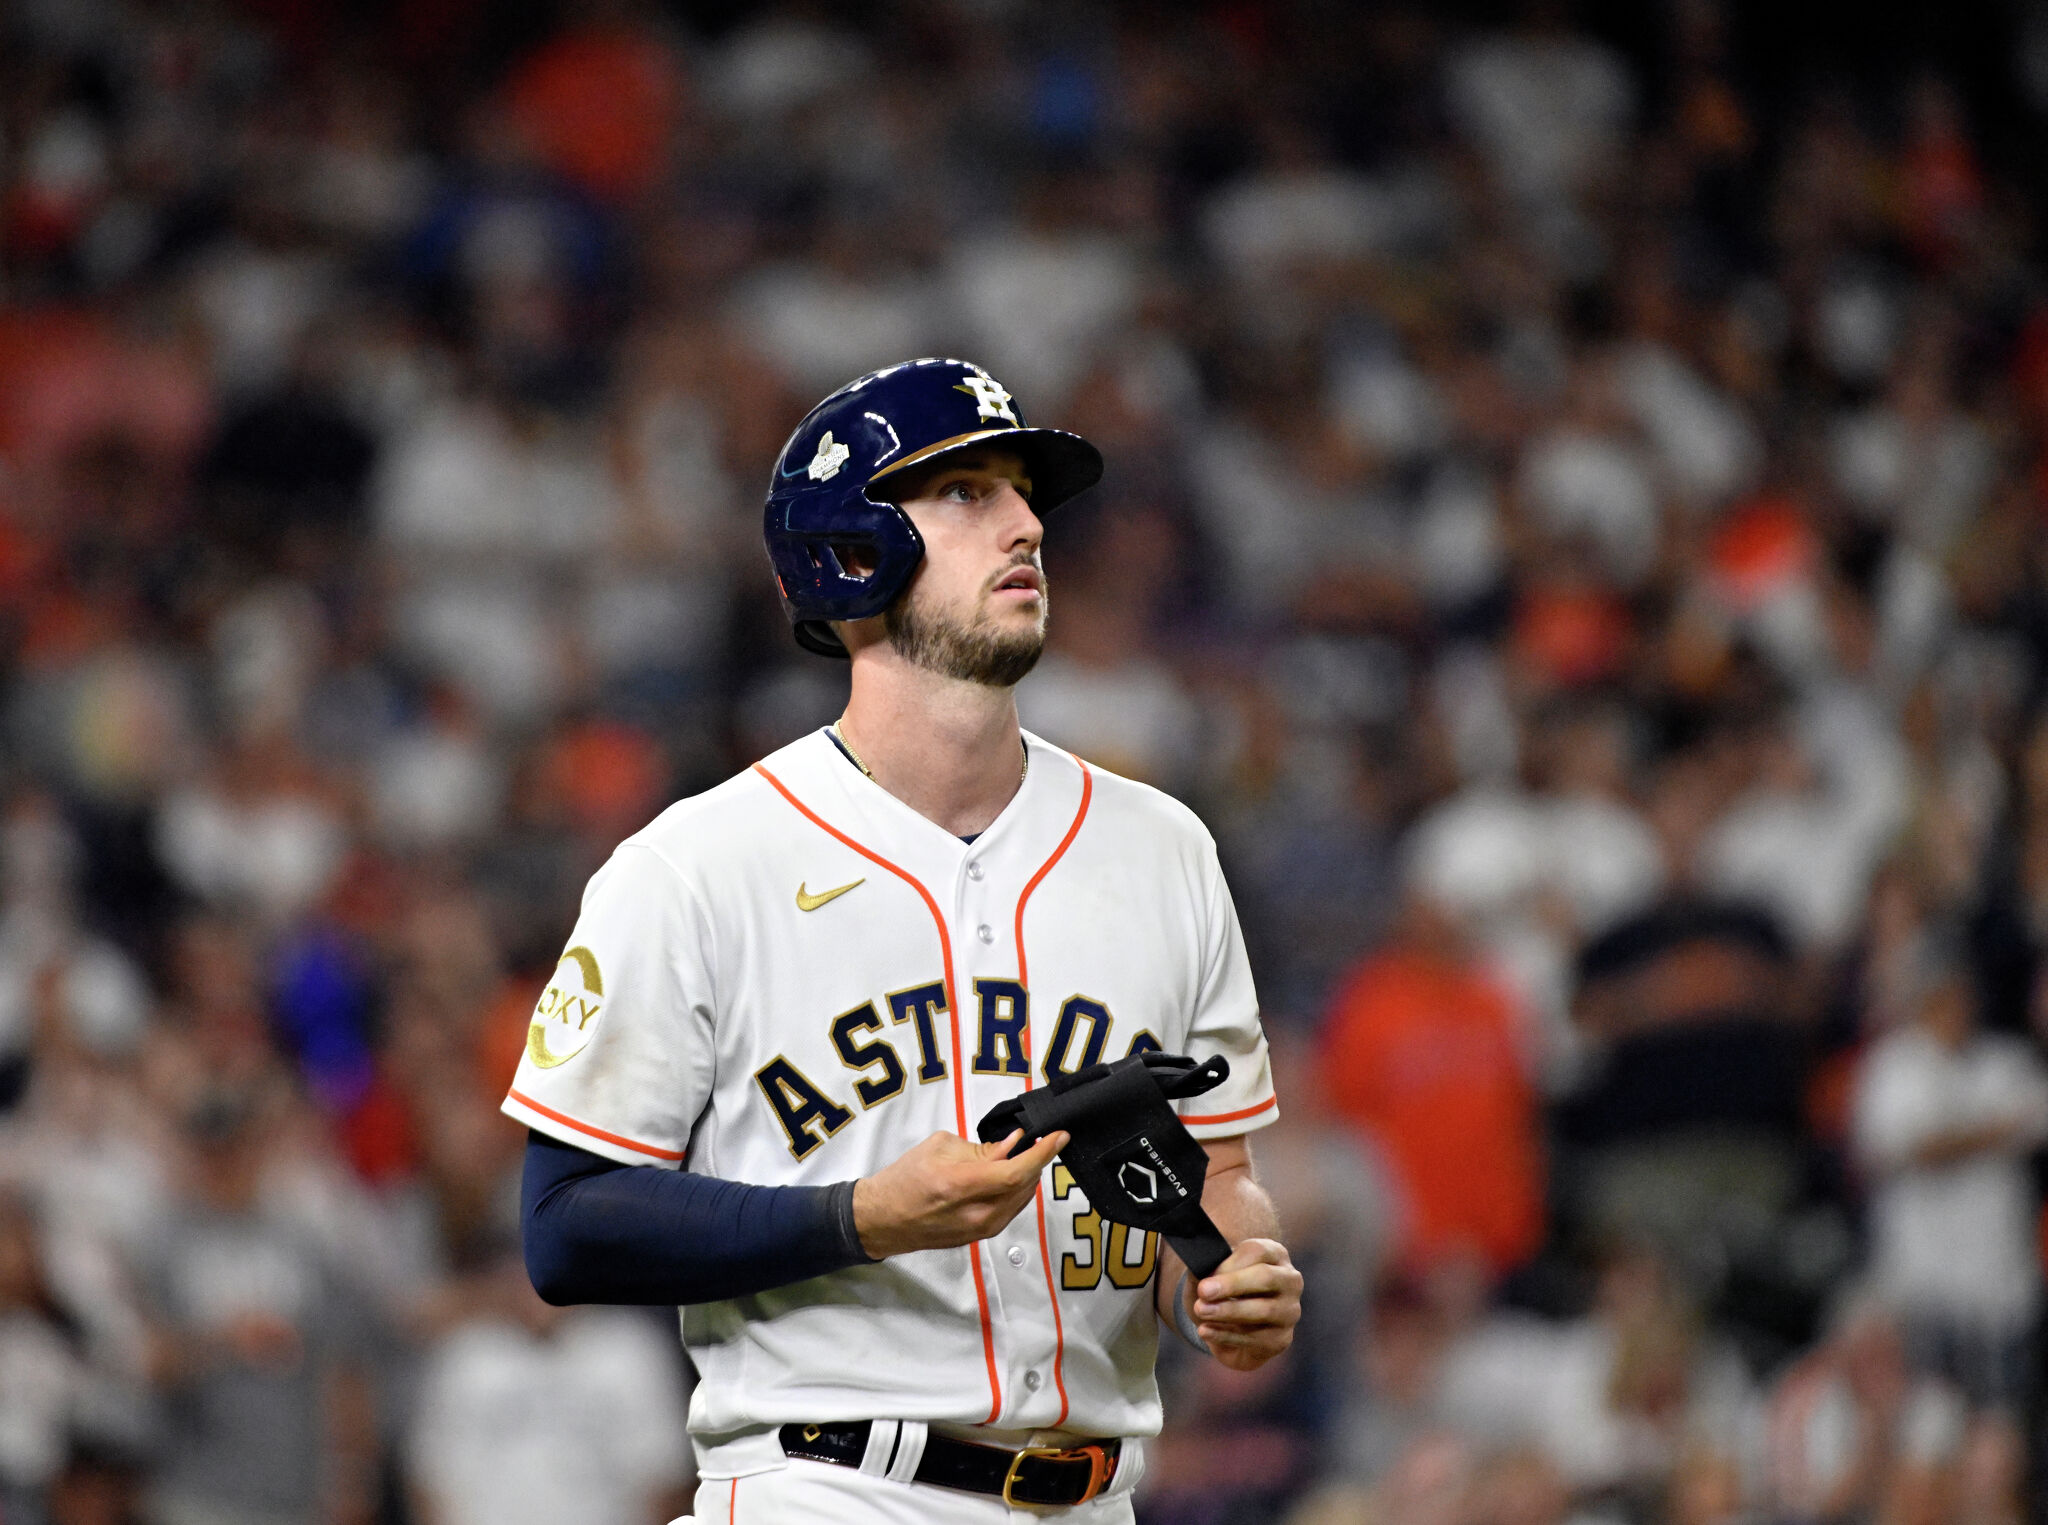 Houston Astros: Cristian Javier signs five-year contract extension